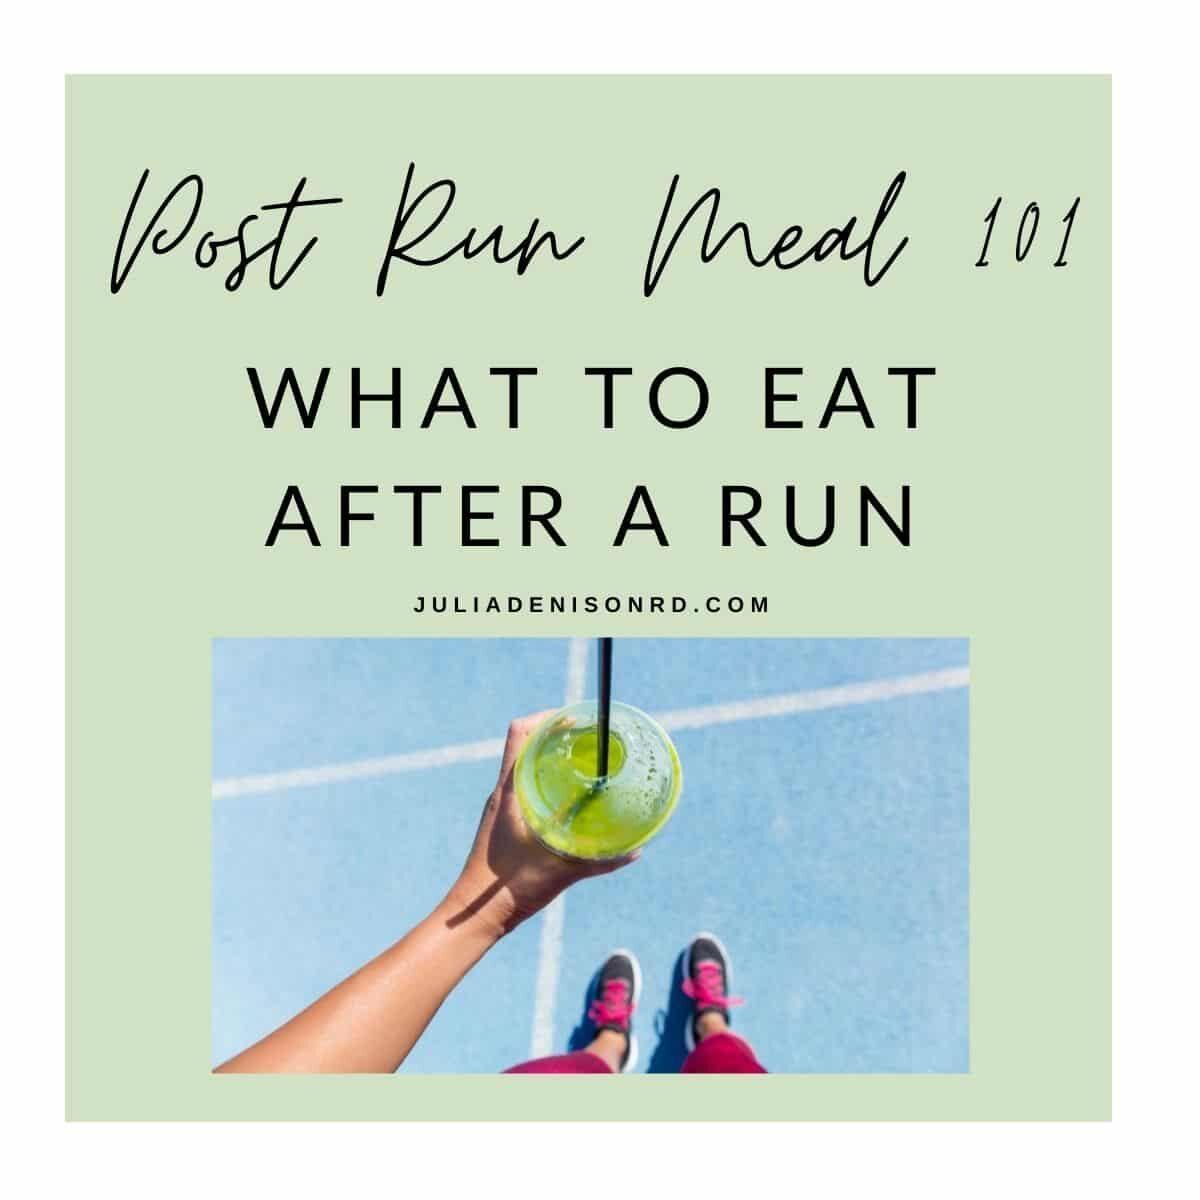 Featured image, post run meal 101 what to eat after a run, runner holding a smoothie